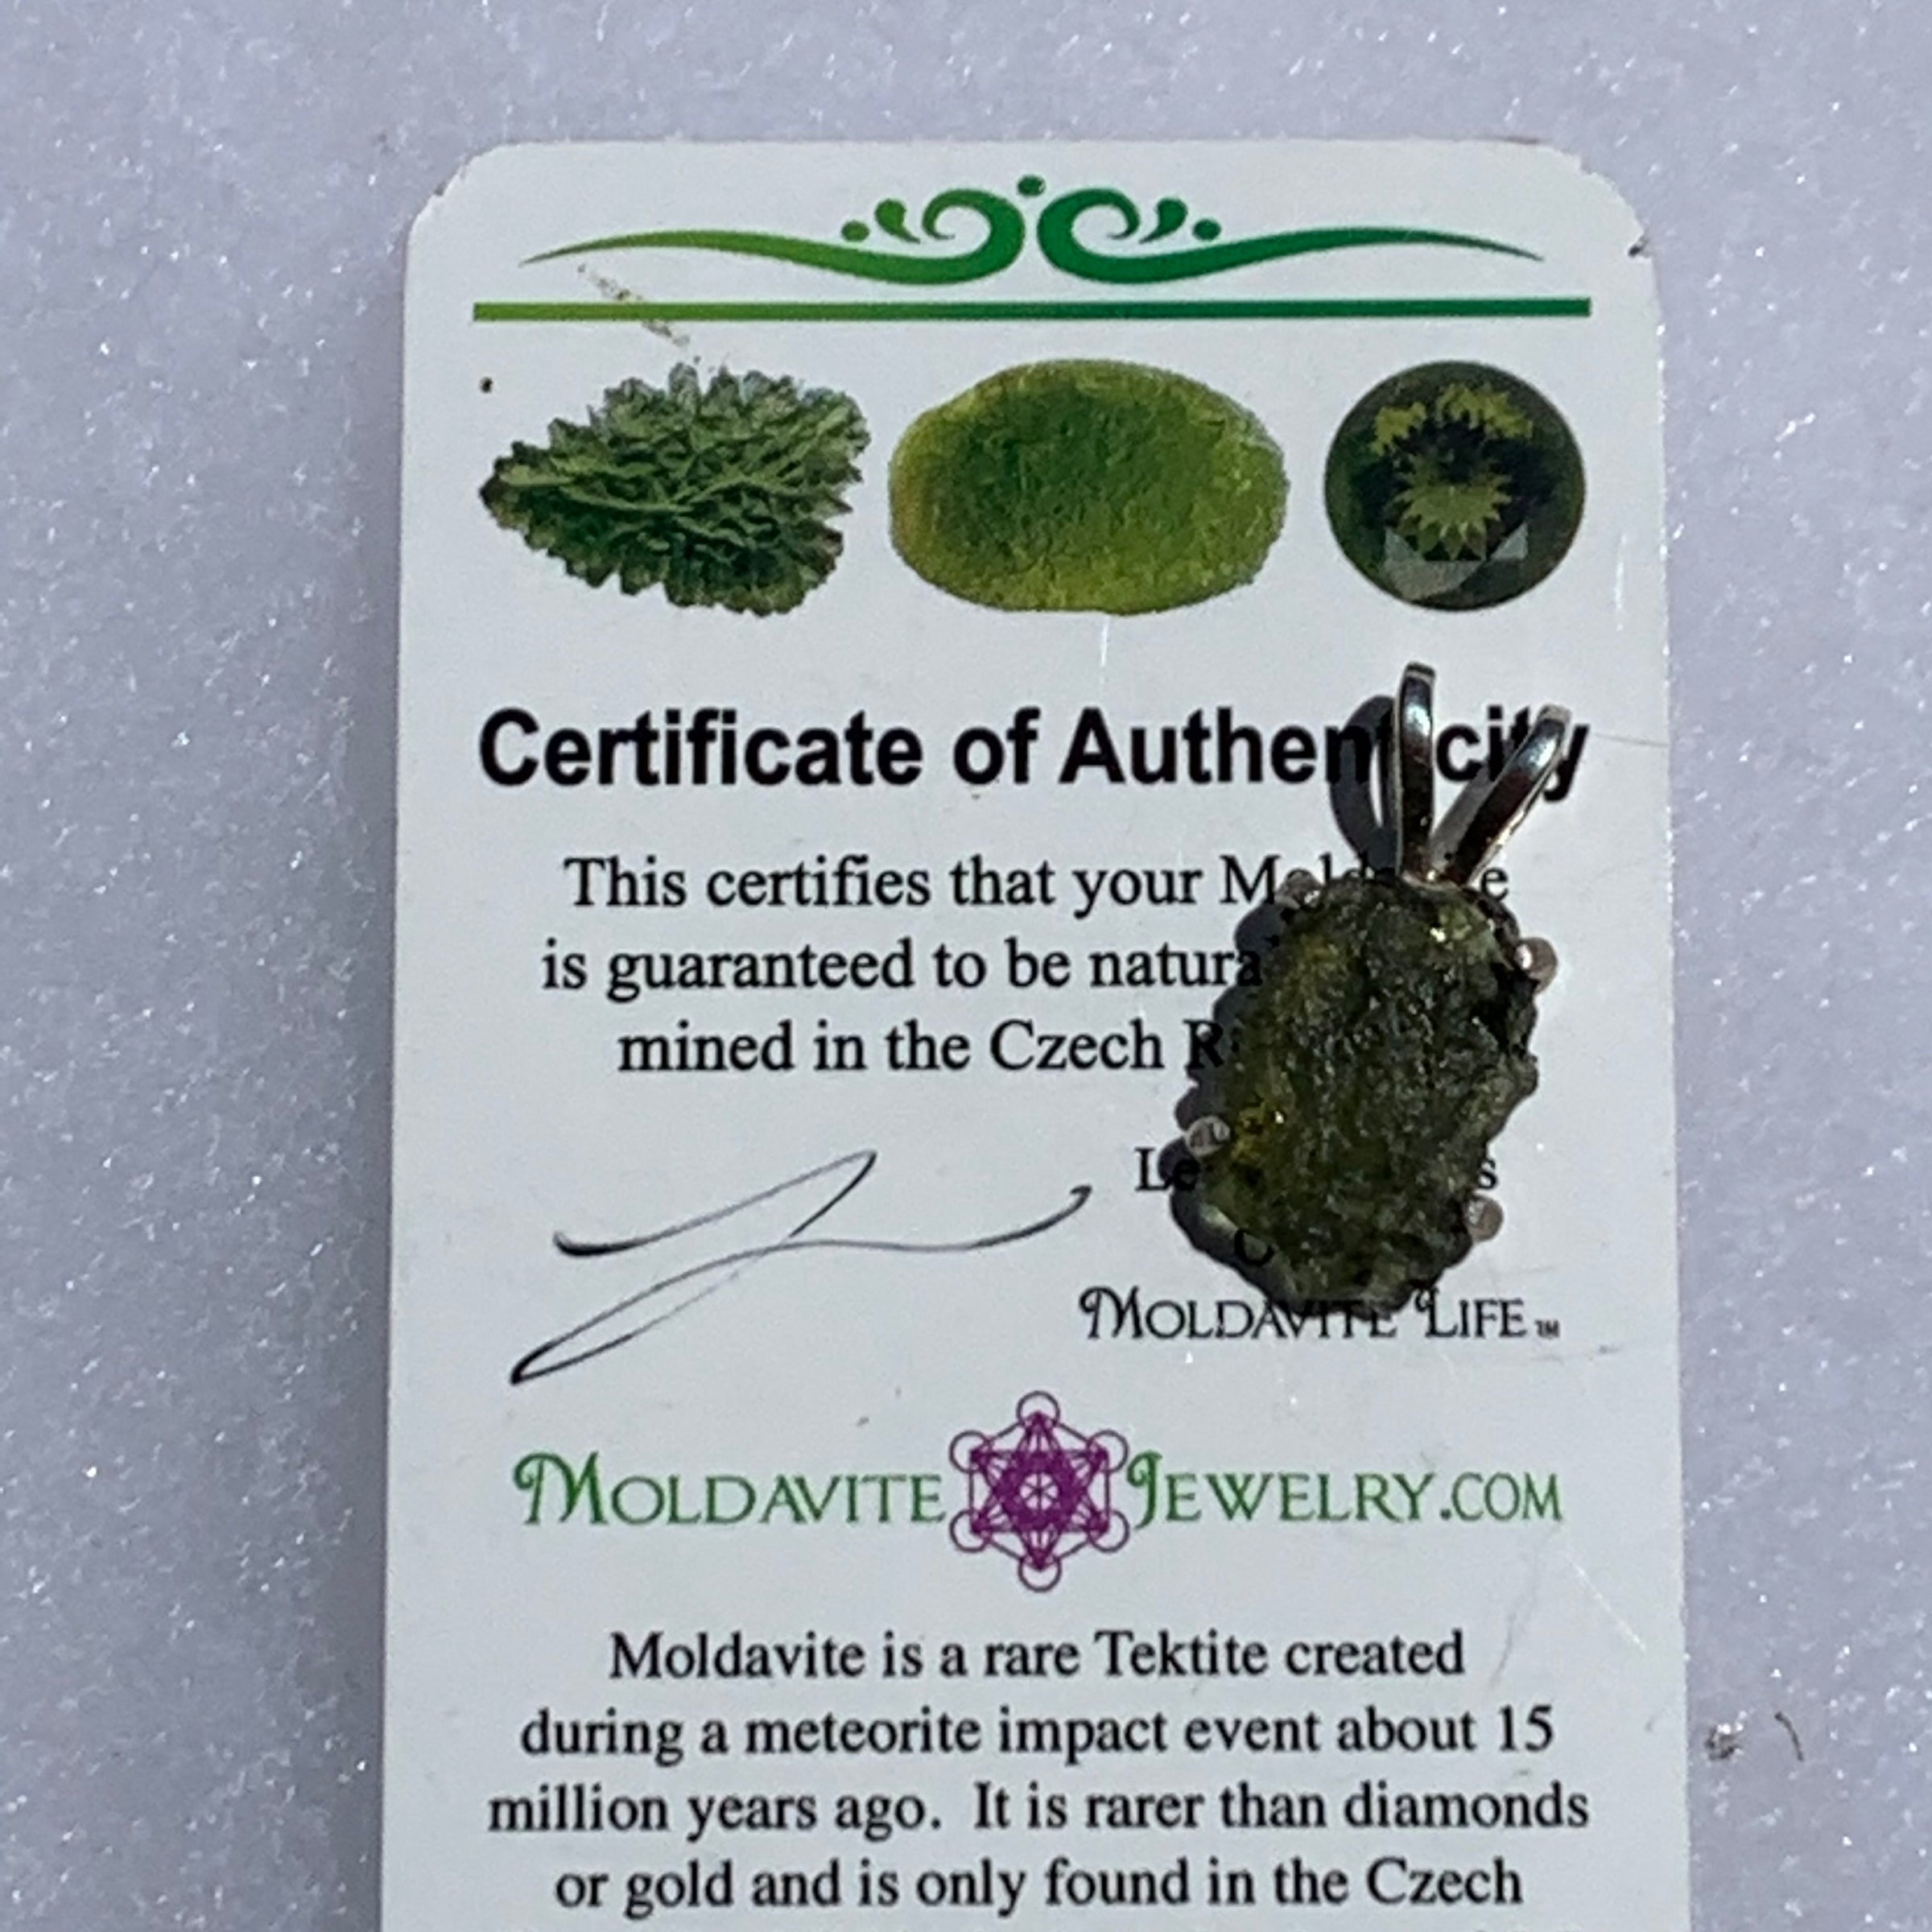 raw moldavite tektite in 4 prong sterling silver basket pendant sitting on moldavite certificate of authenticity for display